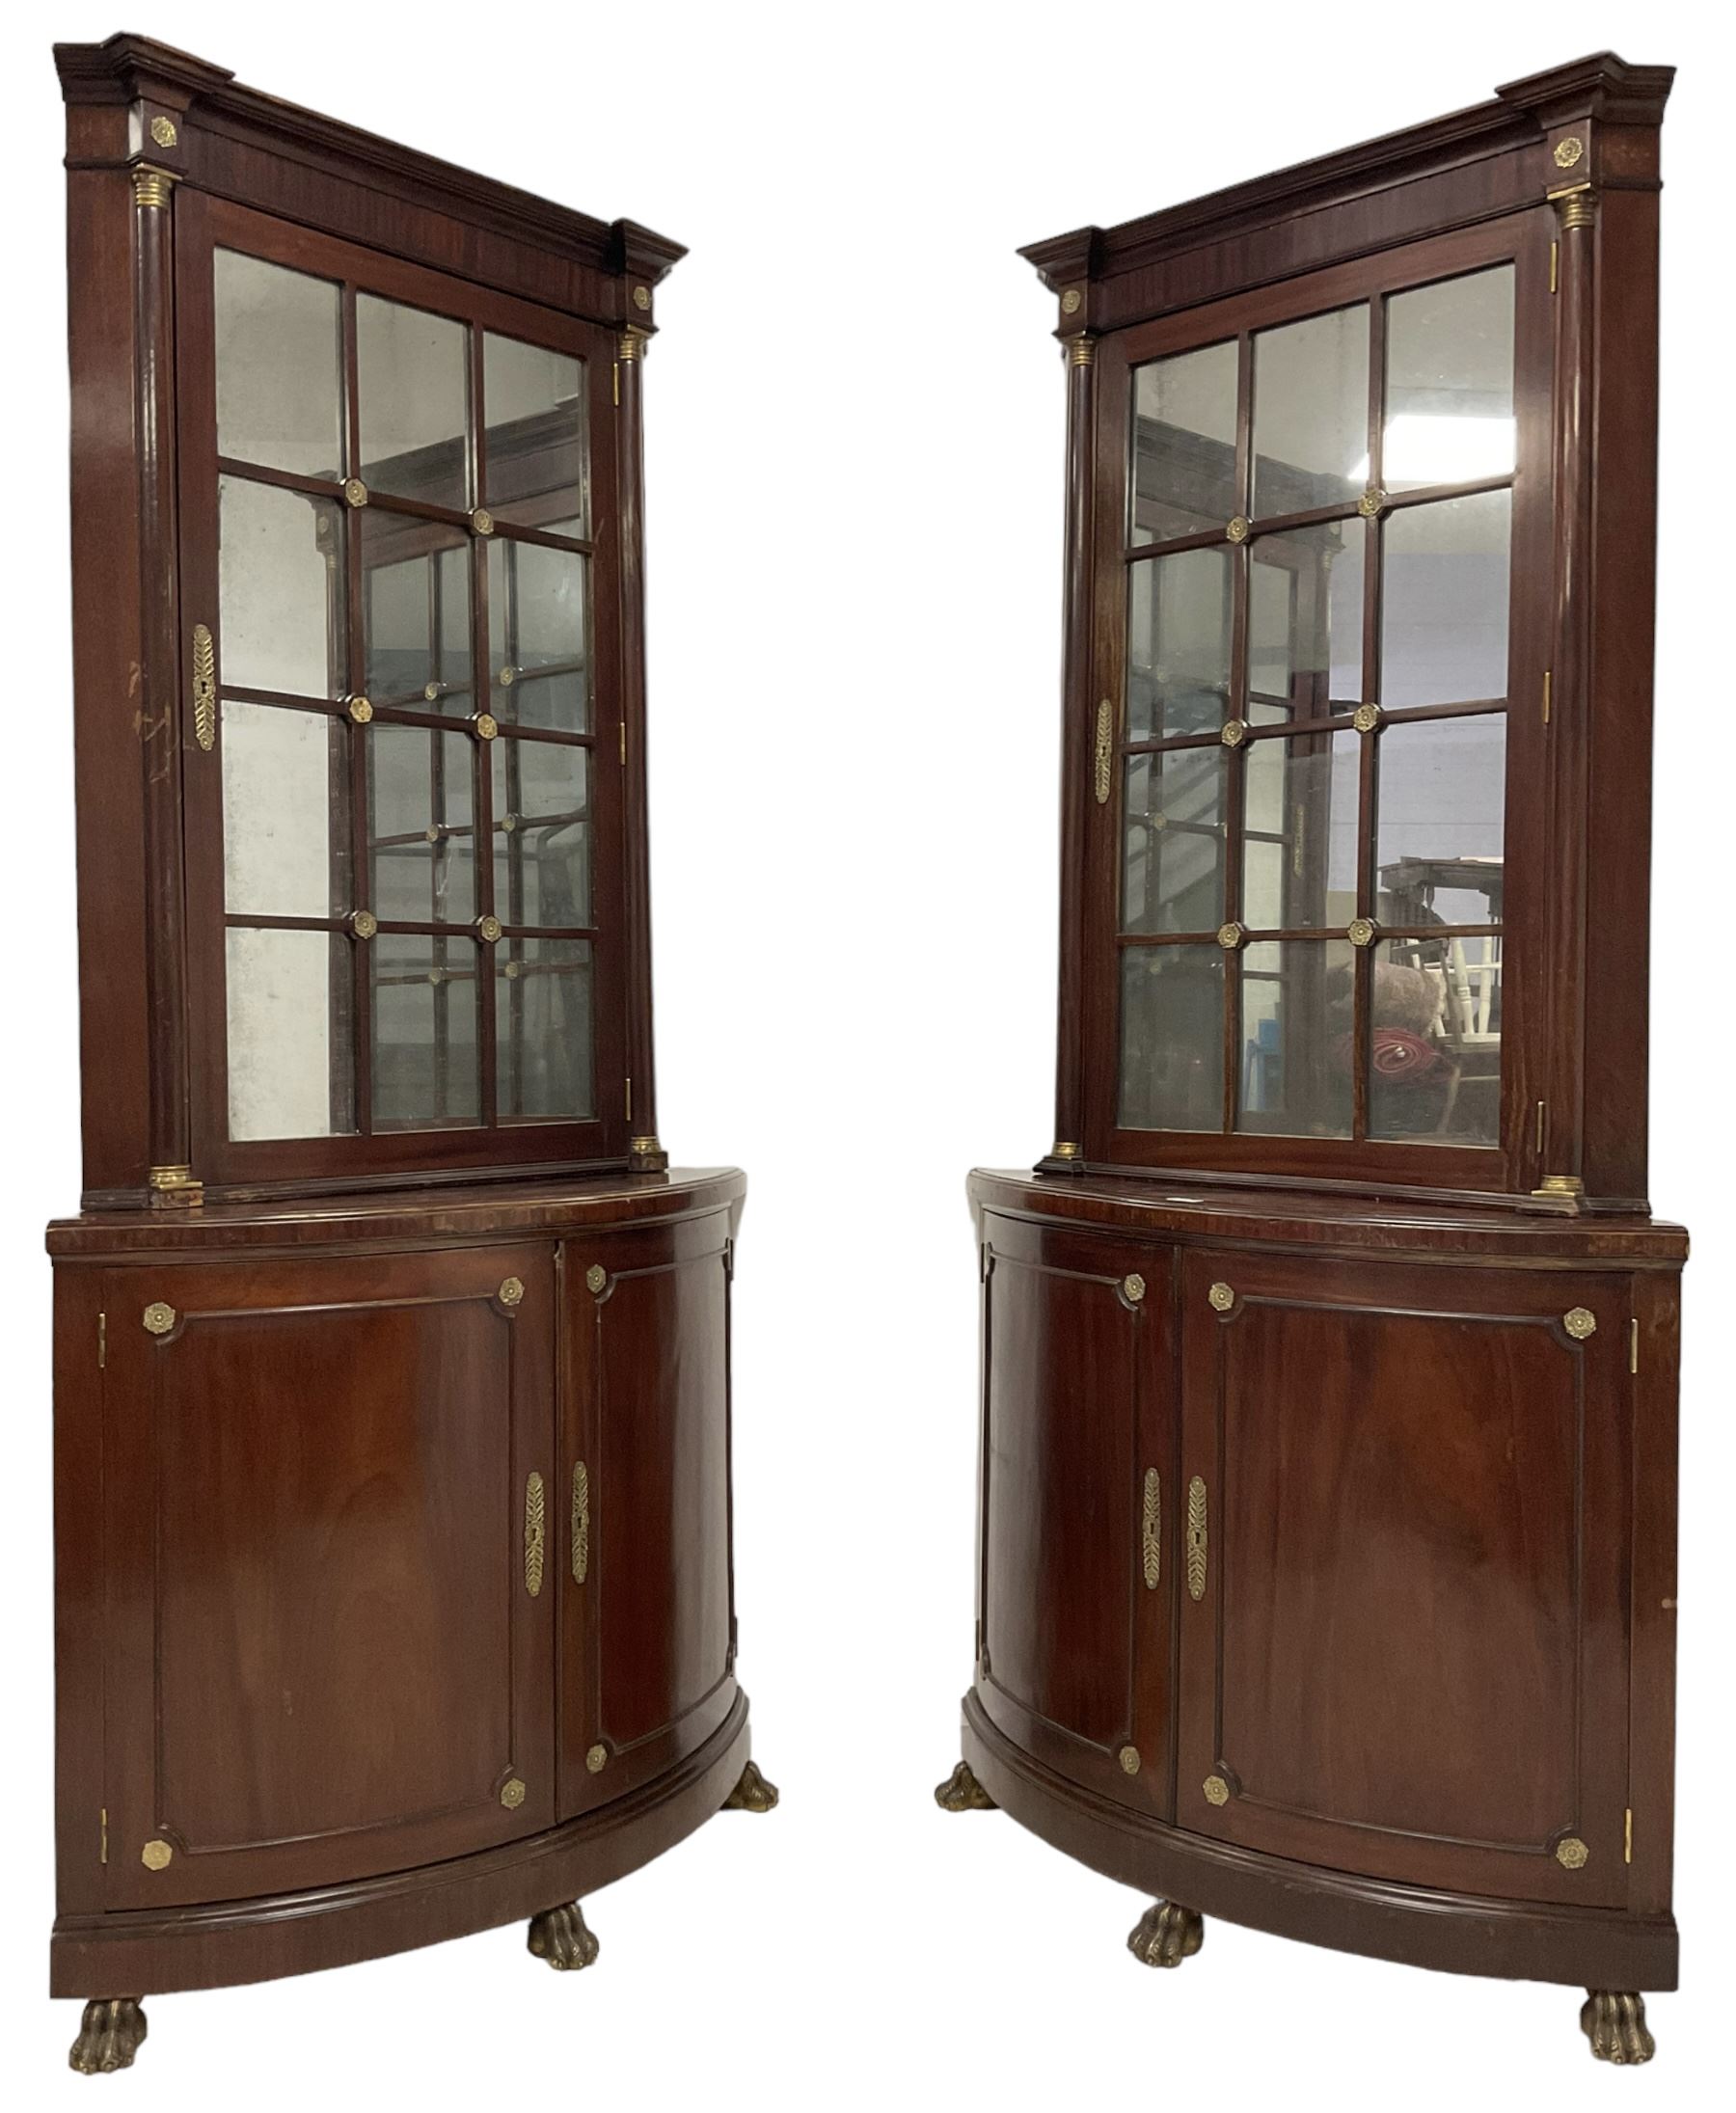 Pair of French Empire design corner cabinets